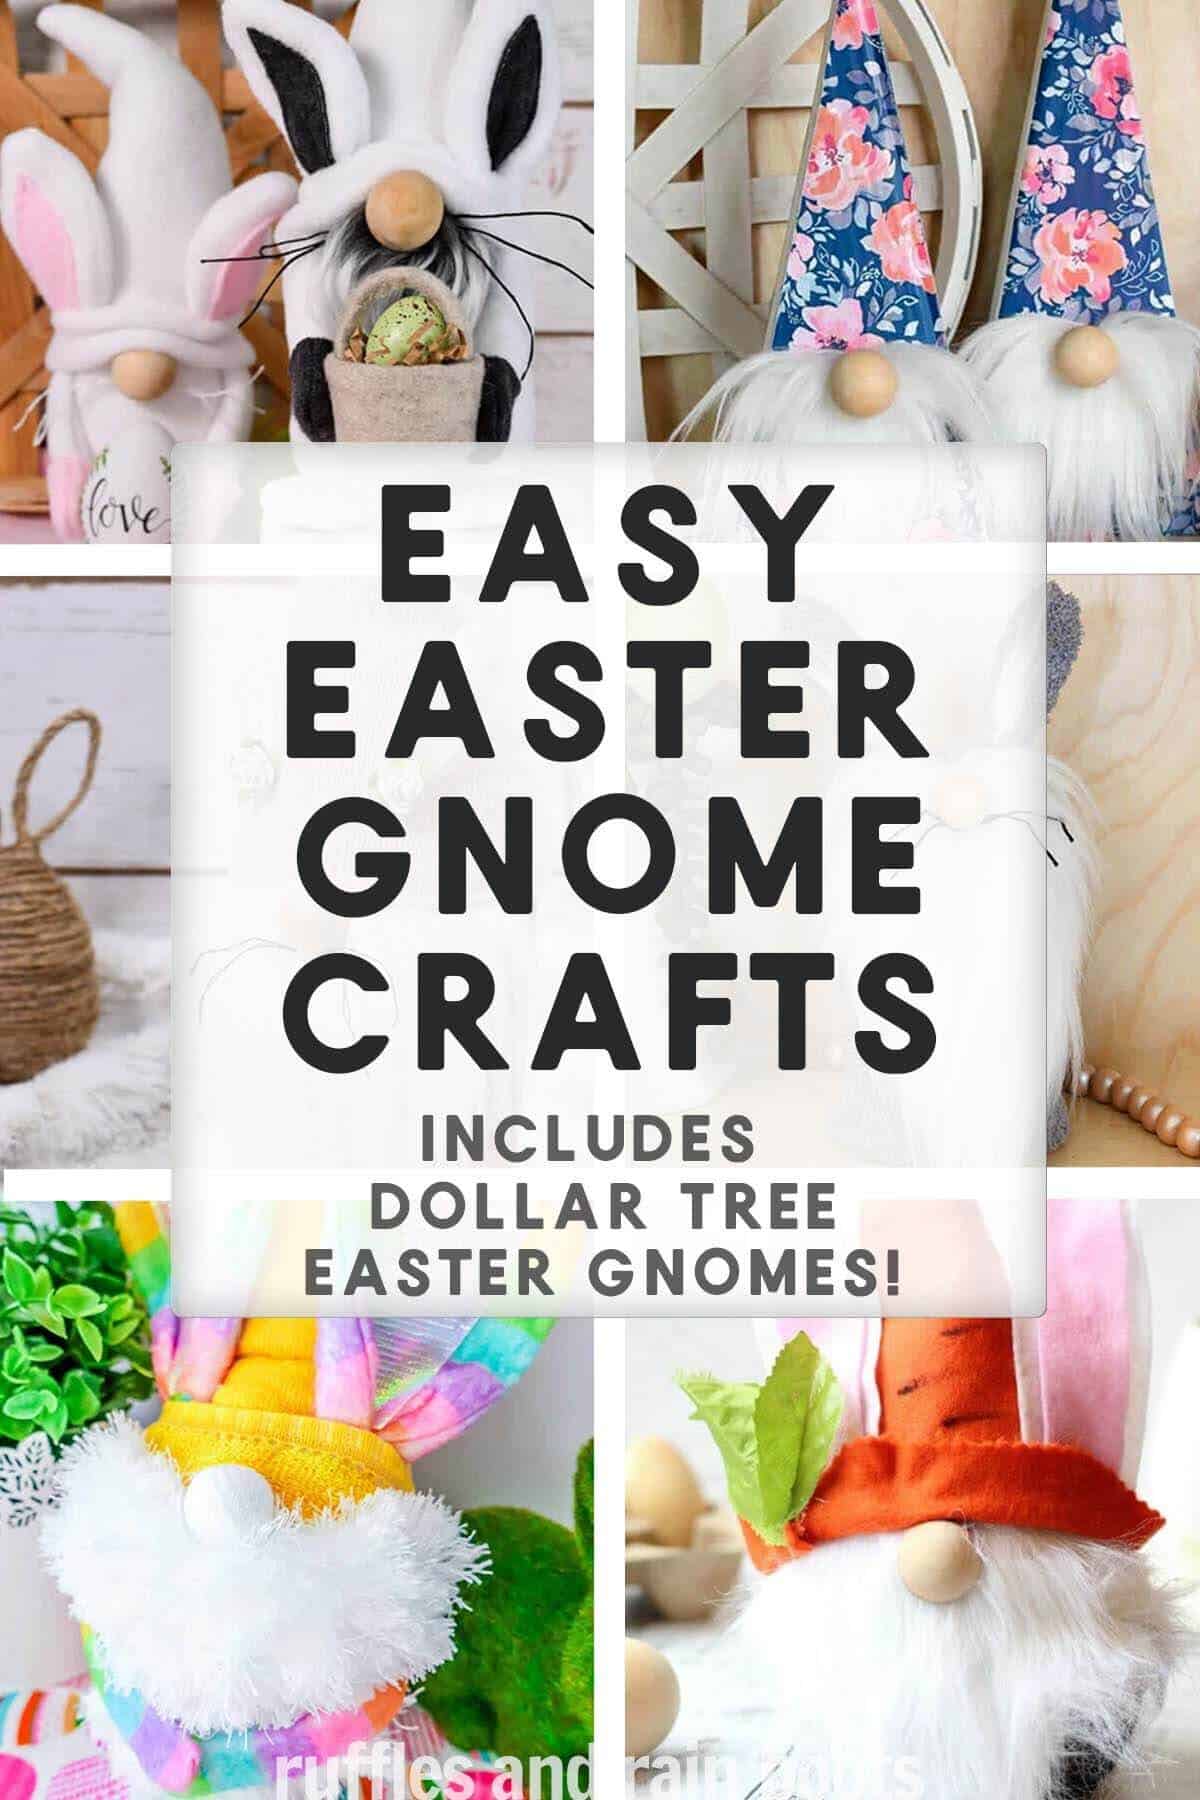 Six image vertical collage of holiday gnomes with text which reads easy Easy Easter Gnome Crafts includes Dollar Tree gnomes.